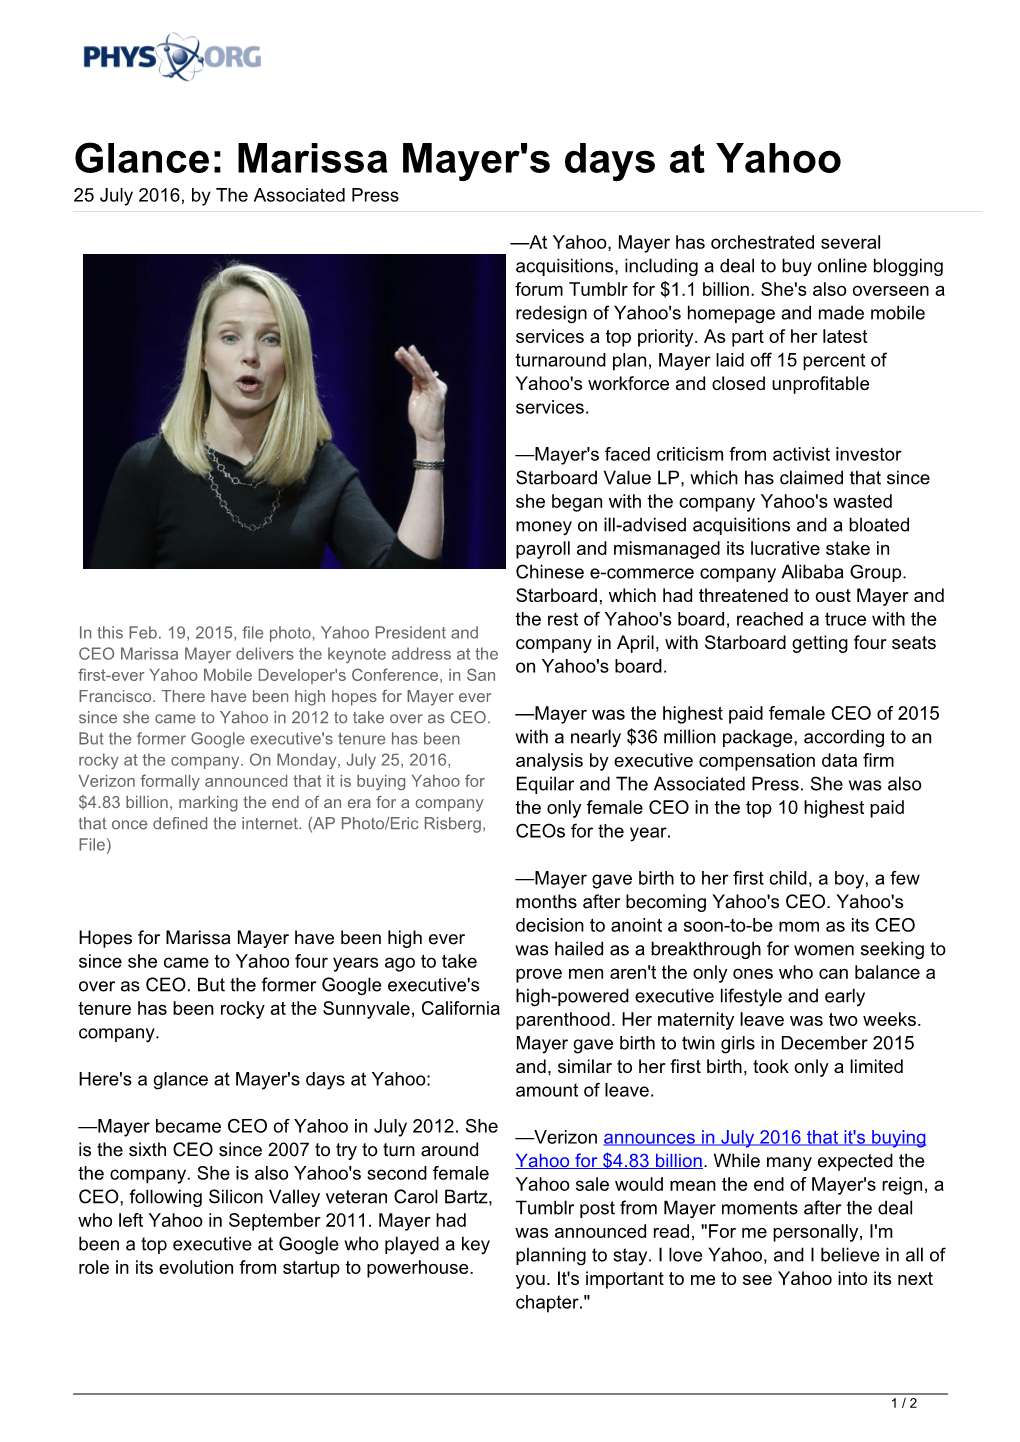 Glance: Marissa Mayer's Days at Yahoo 25 July 2016, by the Associated Press